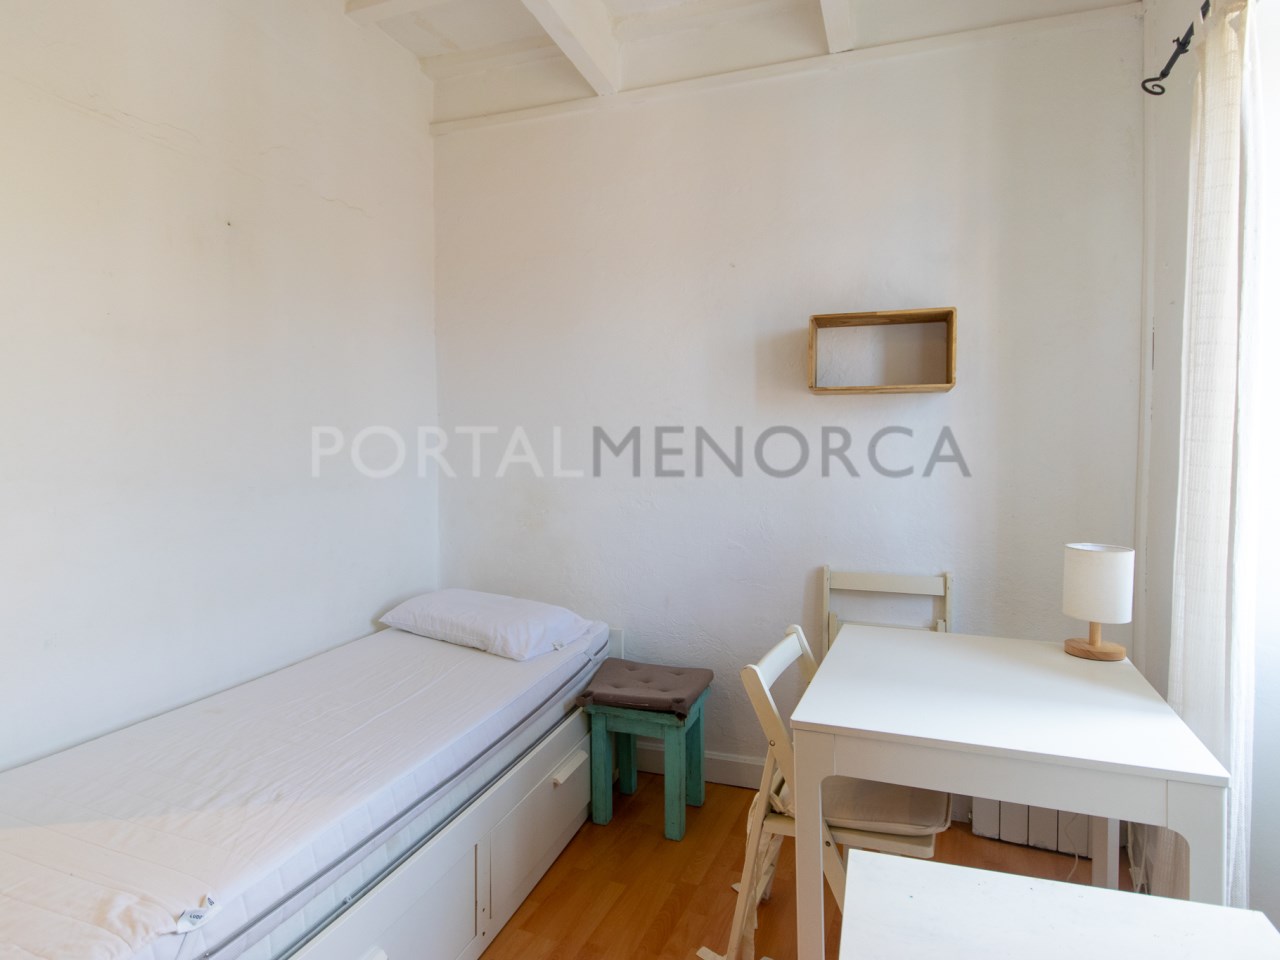 2nd floor building with 3 apartments in the center of Mahon